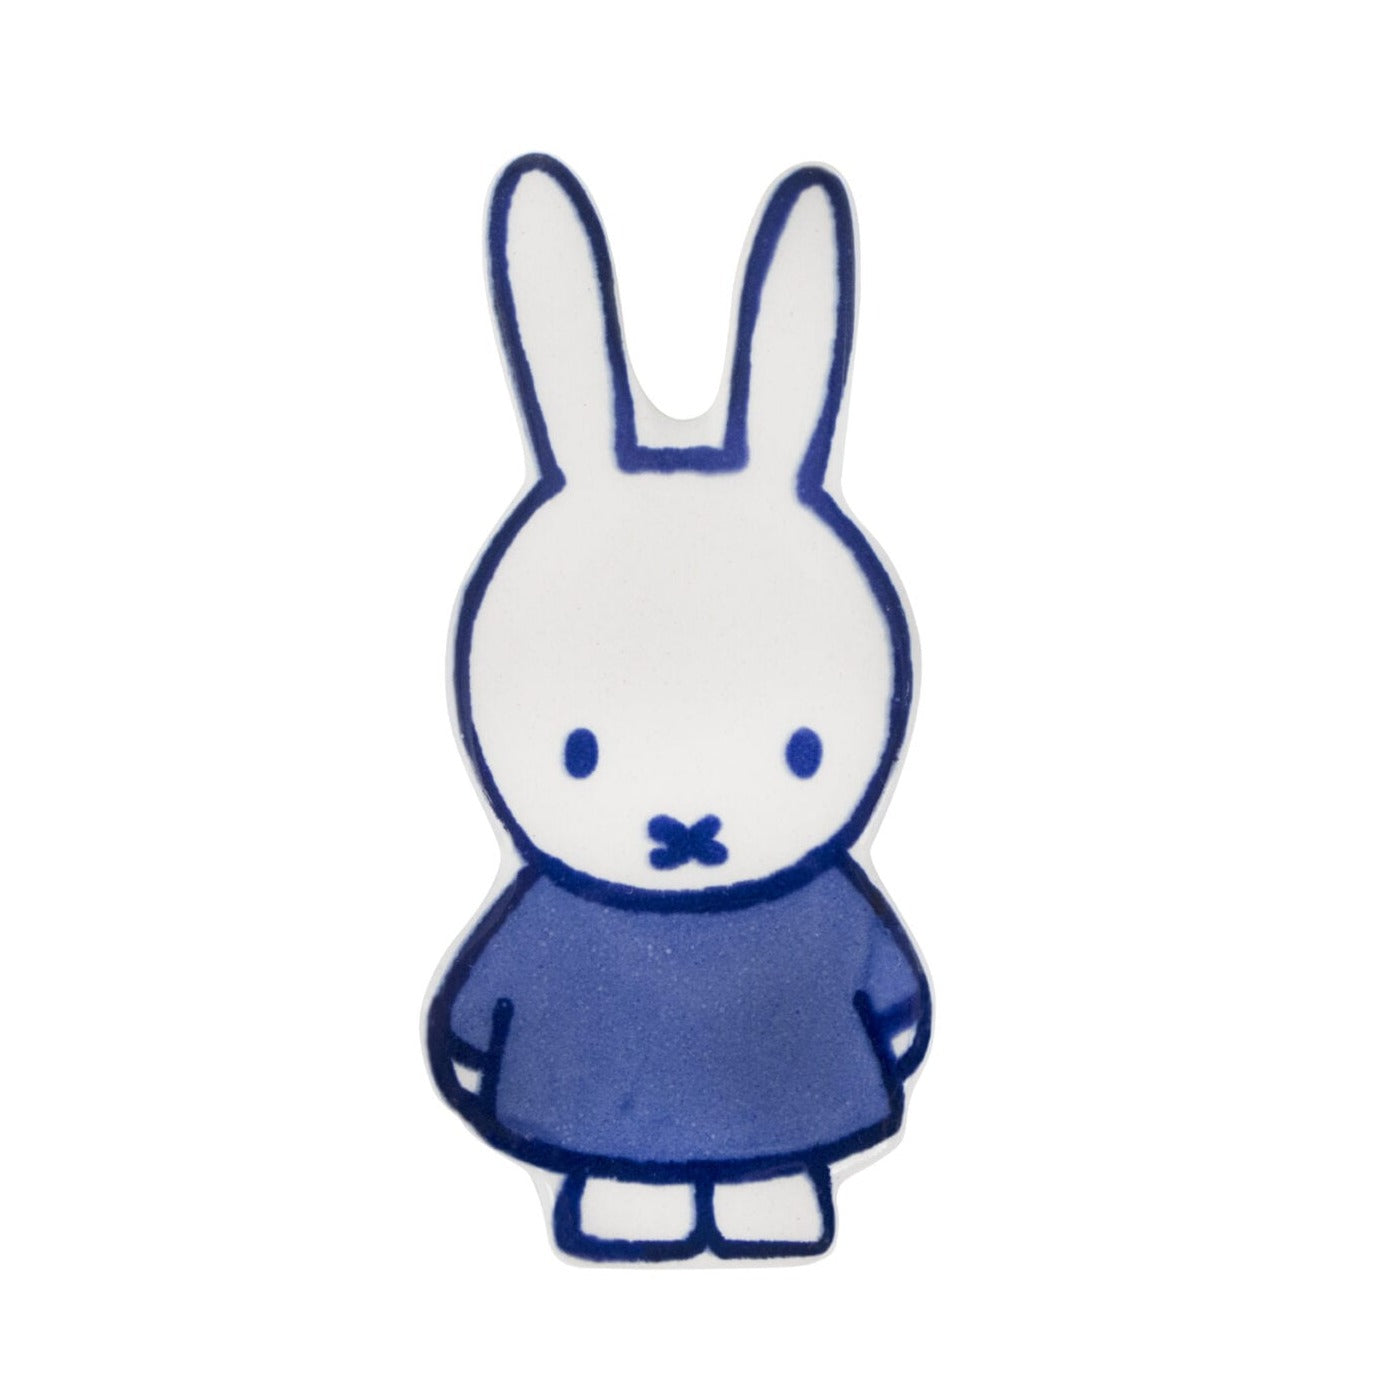 Magnet Miffy Delft Blue by Royal Delft